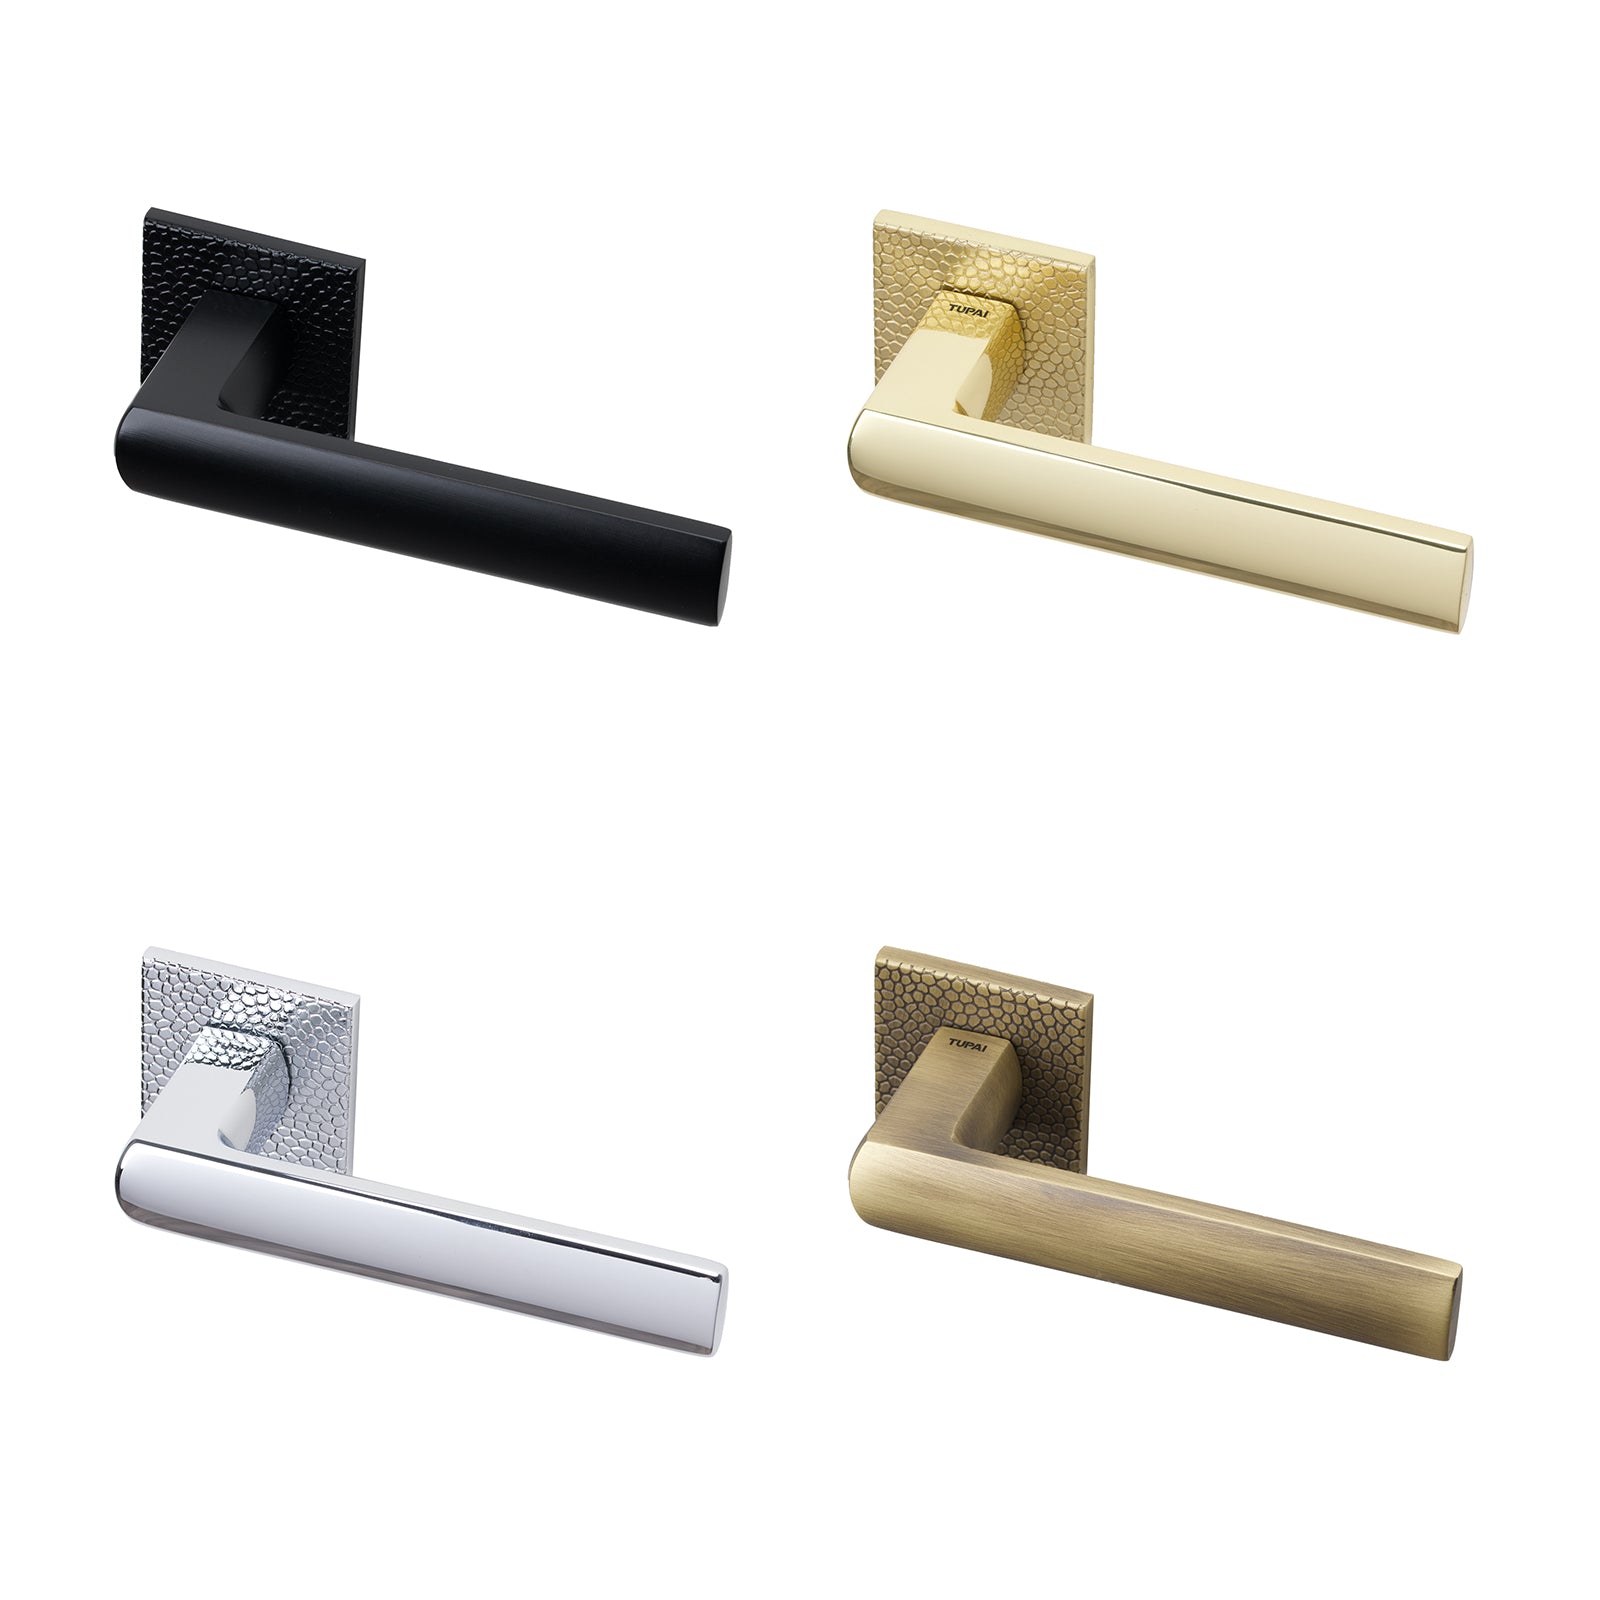 Tupai texture Coroto lever on rose door handles in Pebbles finish with 6mm thick rose